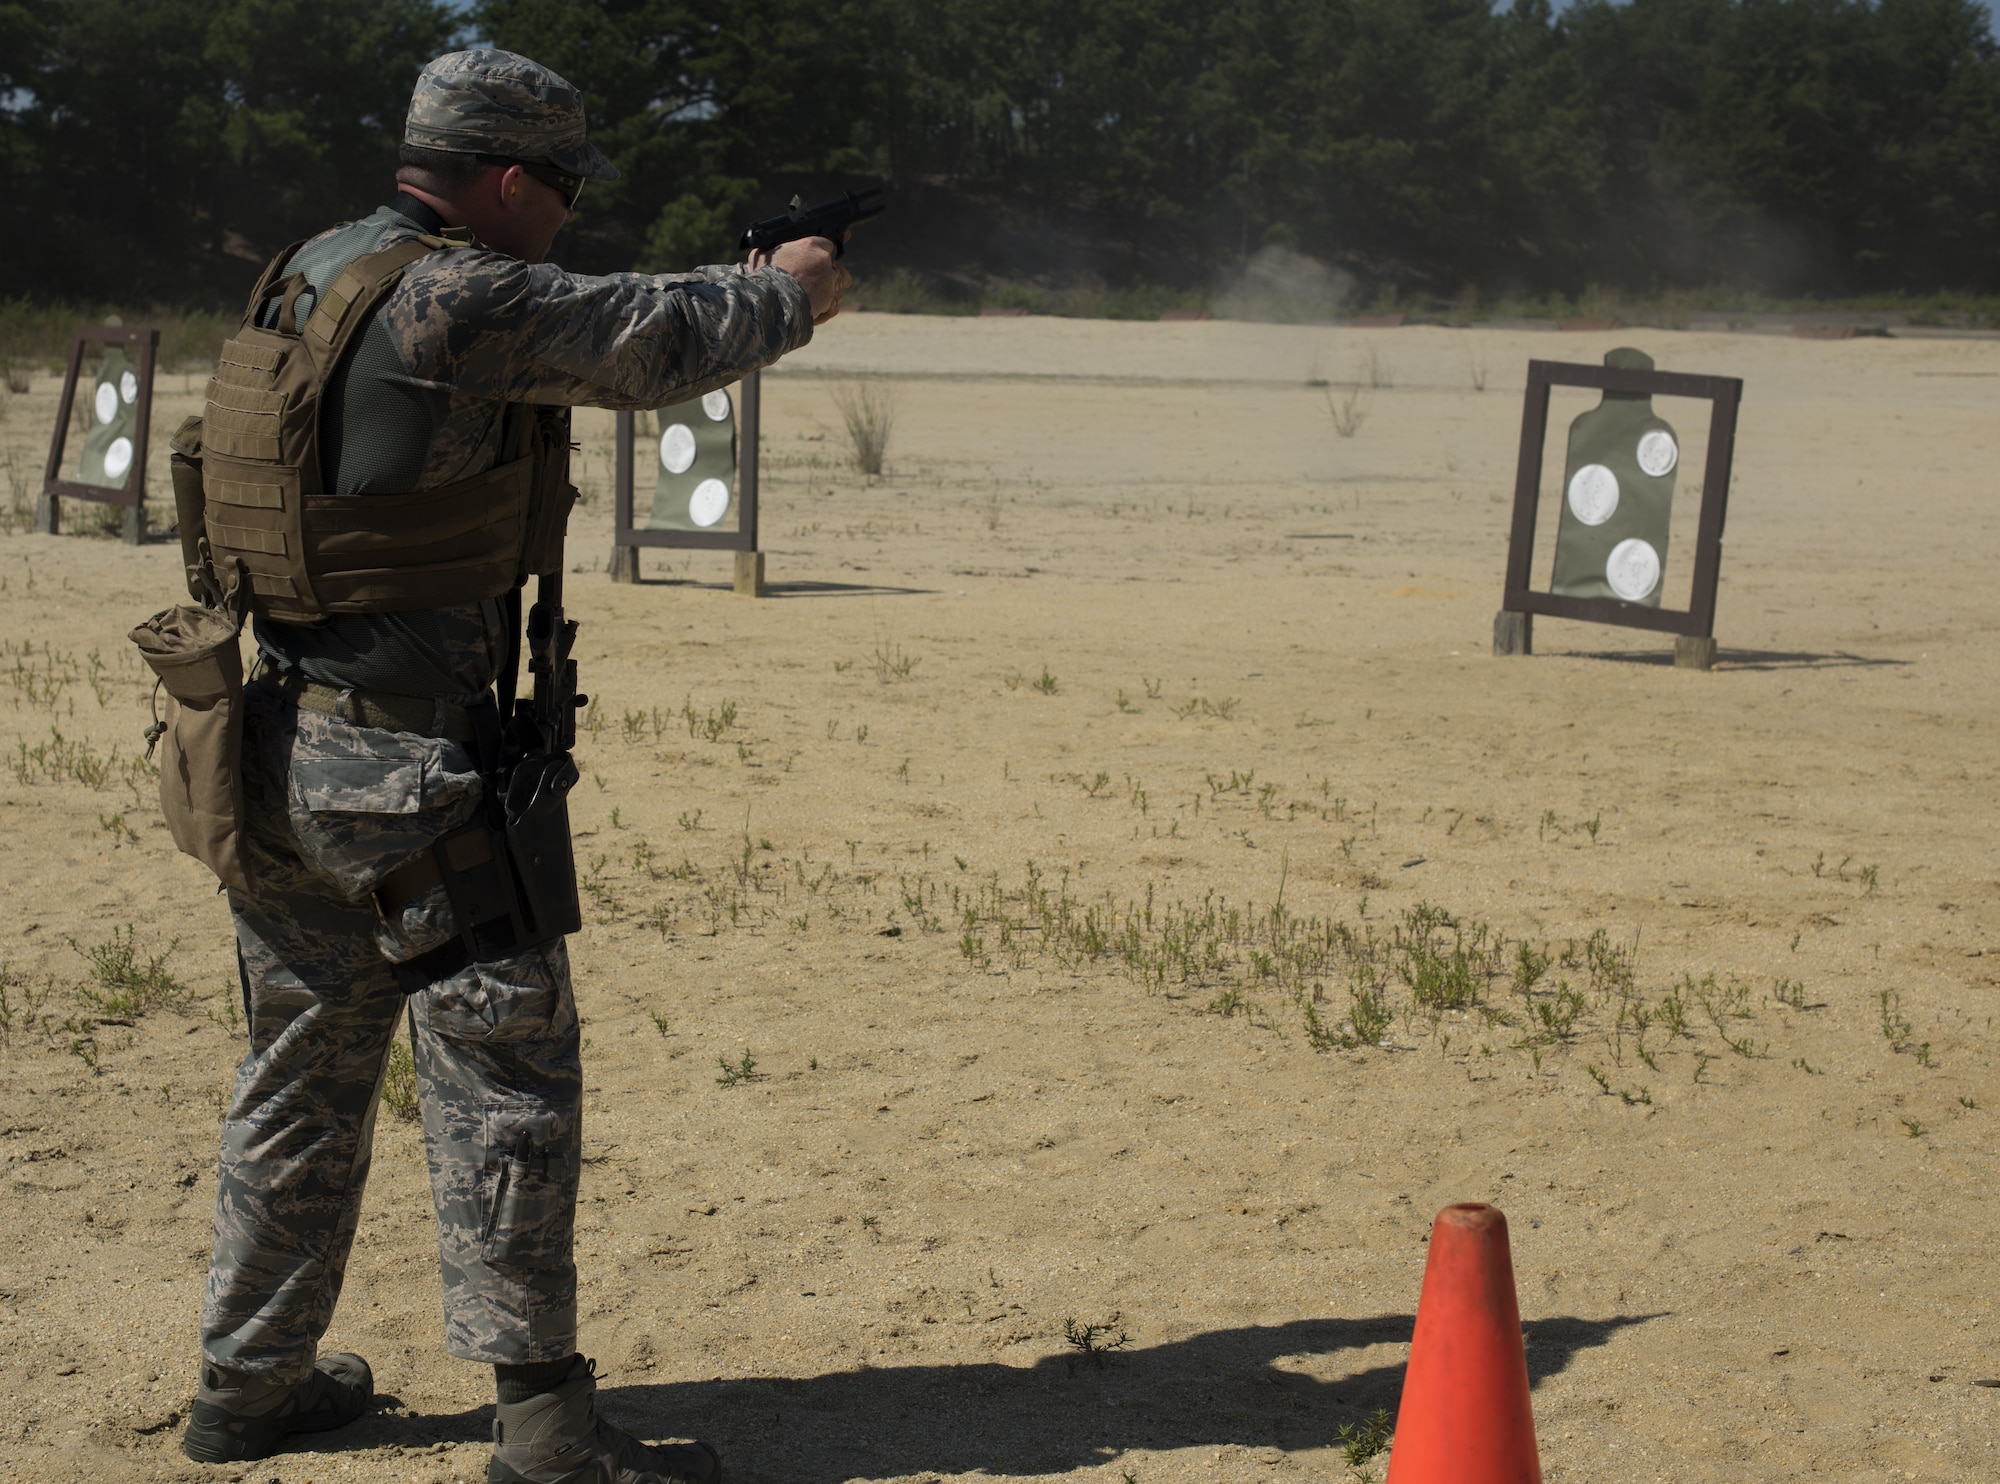 U.S. Air Force Staff Sgt. Luciano Rosano, 421st Security Forces Squadron combat training instructor, fires an m9 pistol during weapons training during preparation for representing Air Mobility Command in the 2018 Defender Challenge on Joint Base McGuire-Dix-Lakehurst, New Jersey, Sept. 4, 2018. Rosano qualified to be a part of the AMC team for the challenge by running a six-mile run while carrying 25-35 pounds. (U.S. Air Force photo by Airman Ariel Owings)